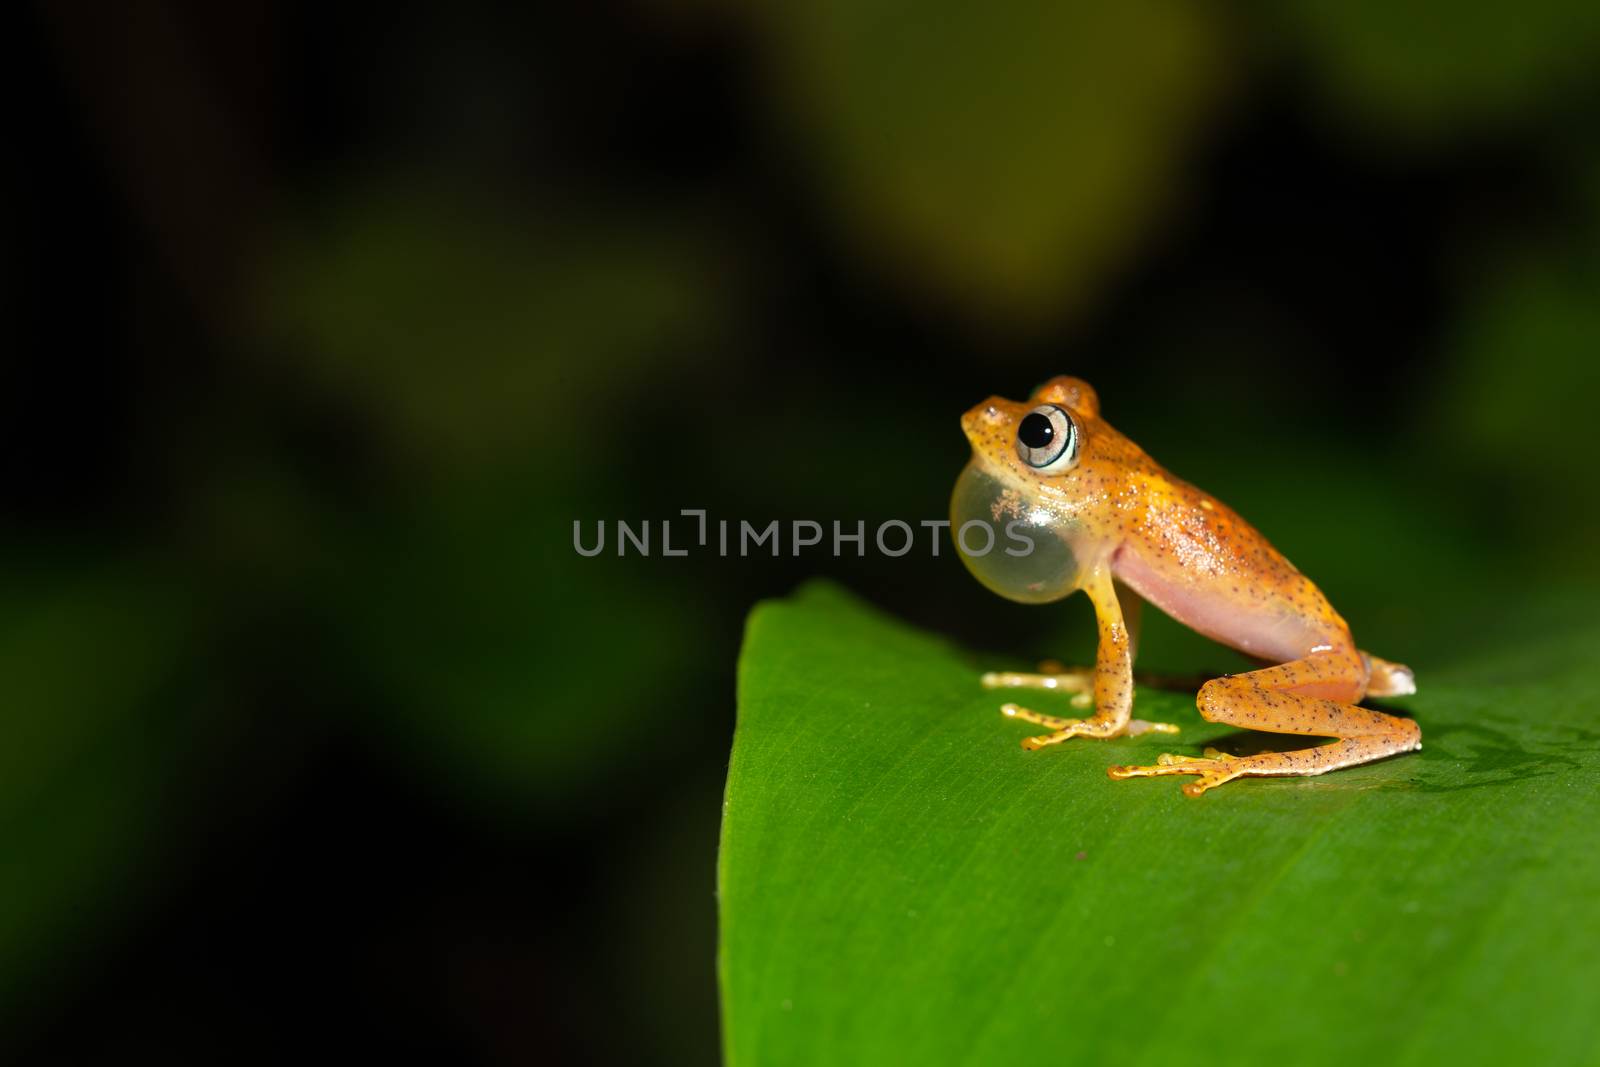 The small orange frog is sitting on a leaf